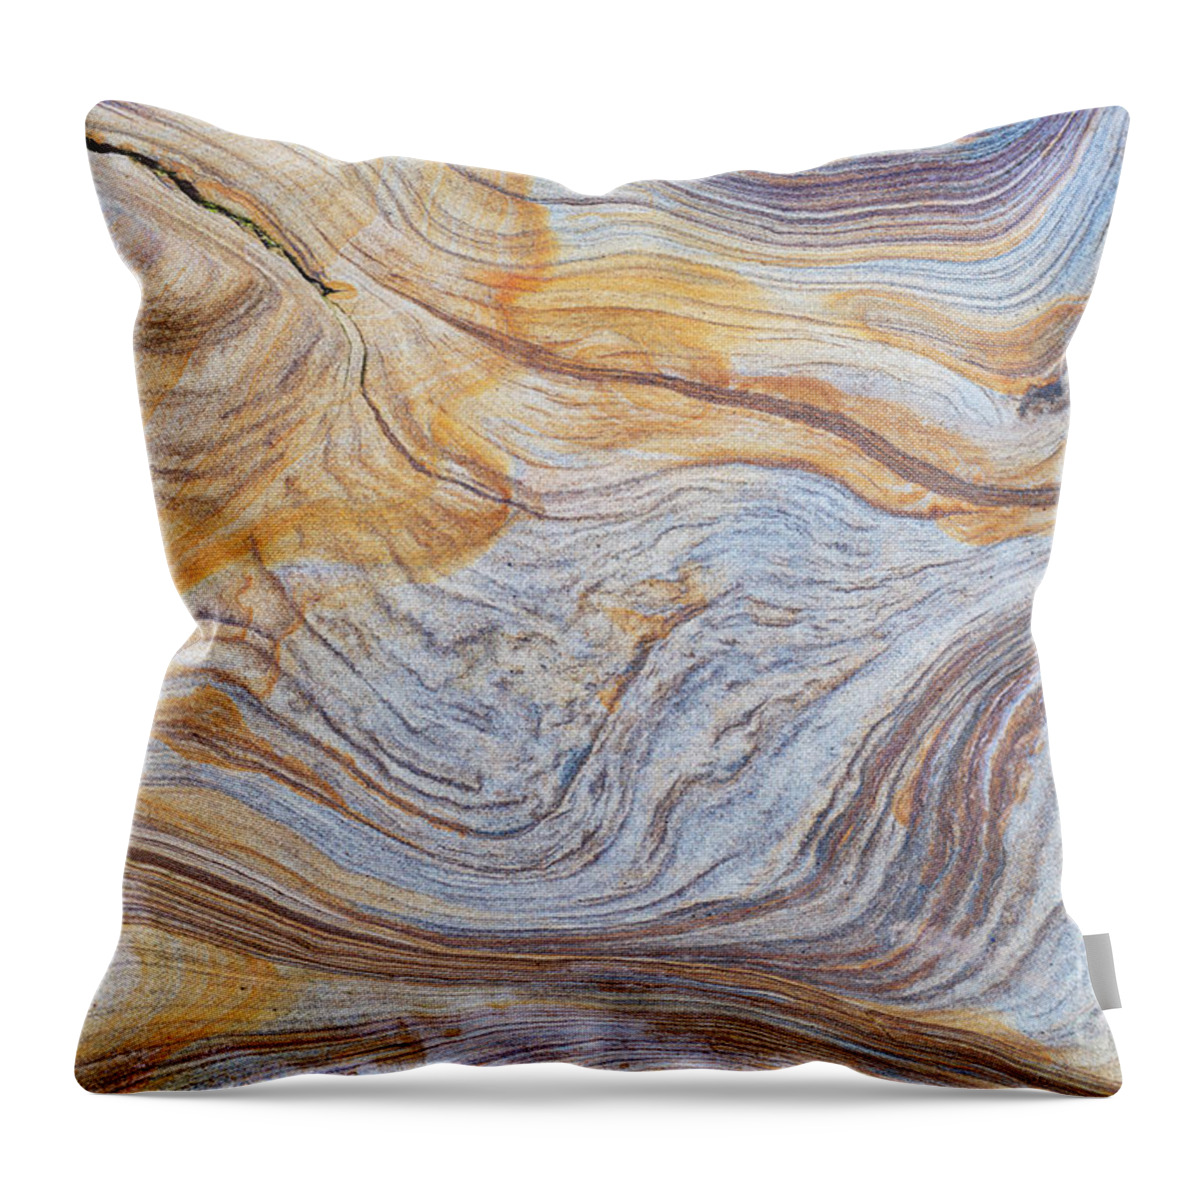 Sandstone Throw Pillow featuring the photograph Convergence by Tim Gainey